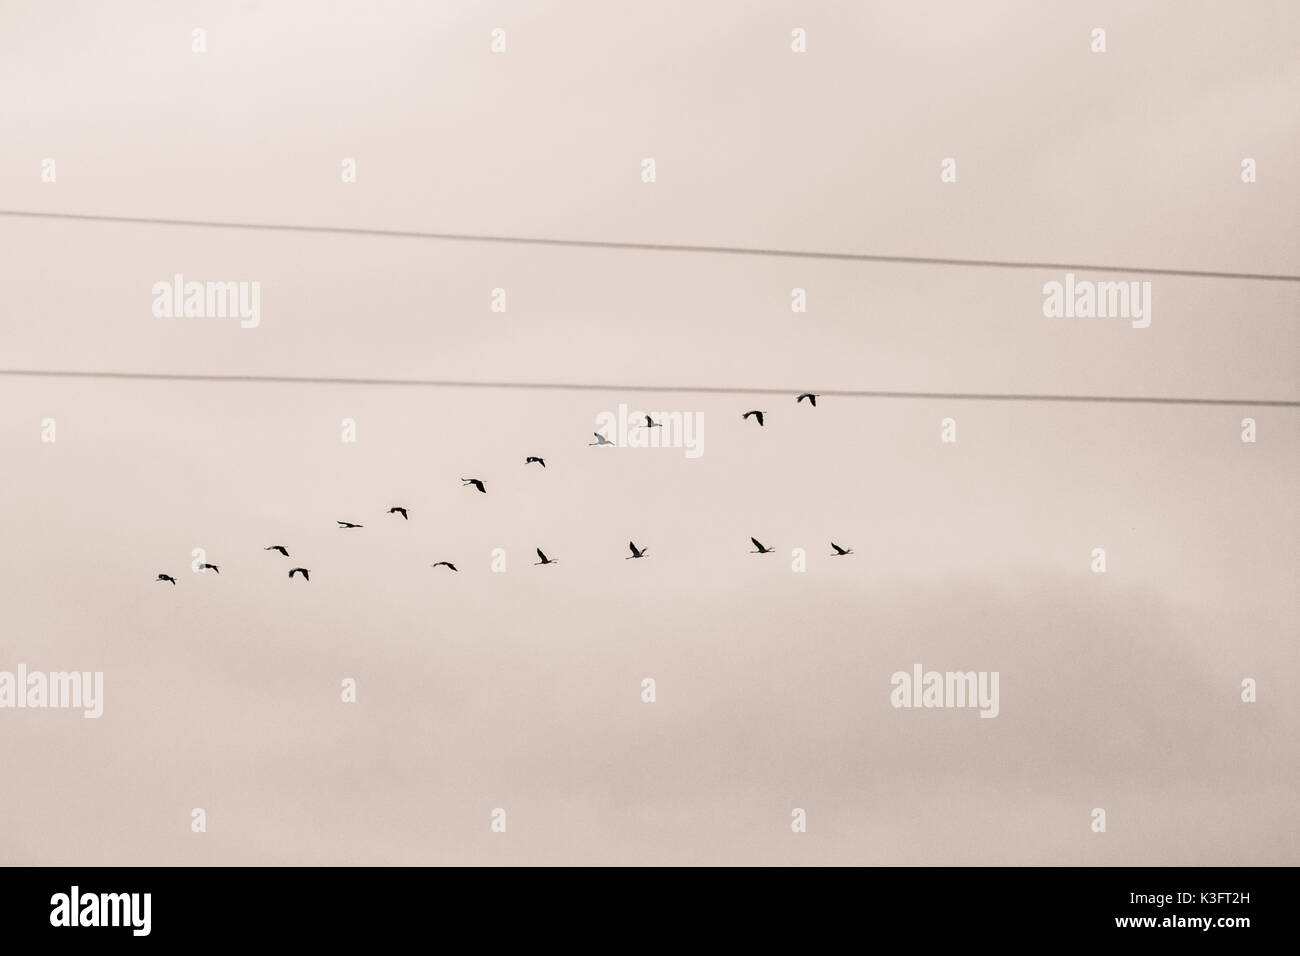 A beautiful formation of a migratory birds in autumn. Cranes flying to the south in fall. Monochrome photograph. Stock Photo